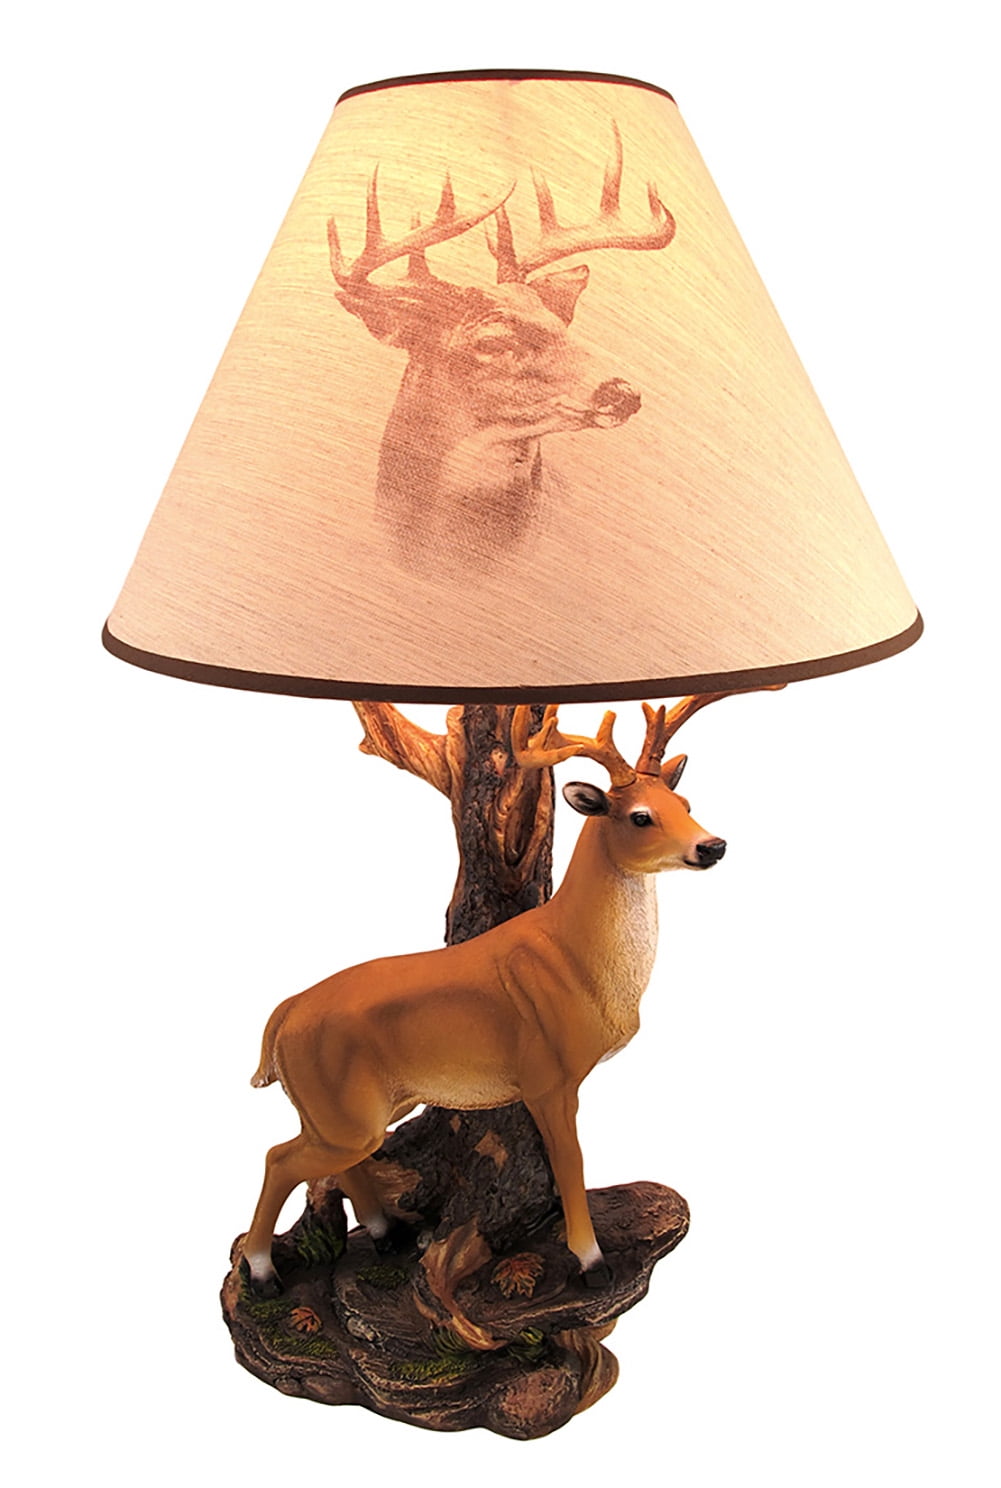 Table Lamp Shade Deer And Stag Wildlife Lampshade Home Decor Ceiling Pendant 3 Diameter Sizes